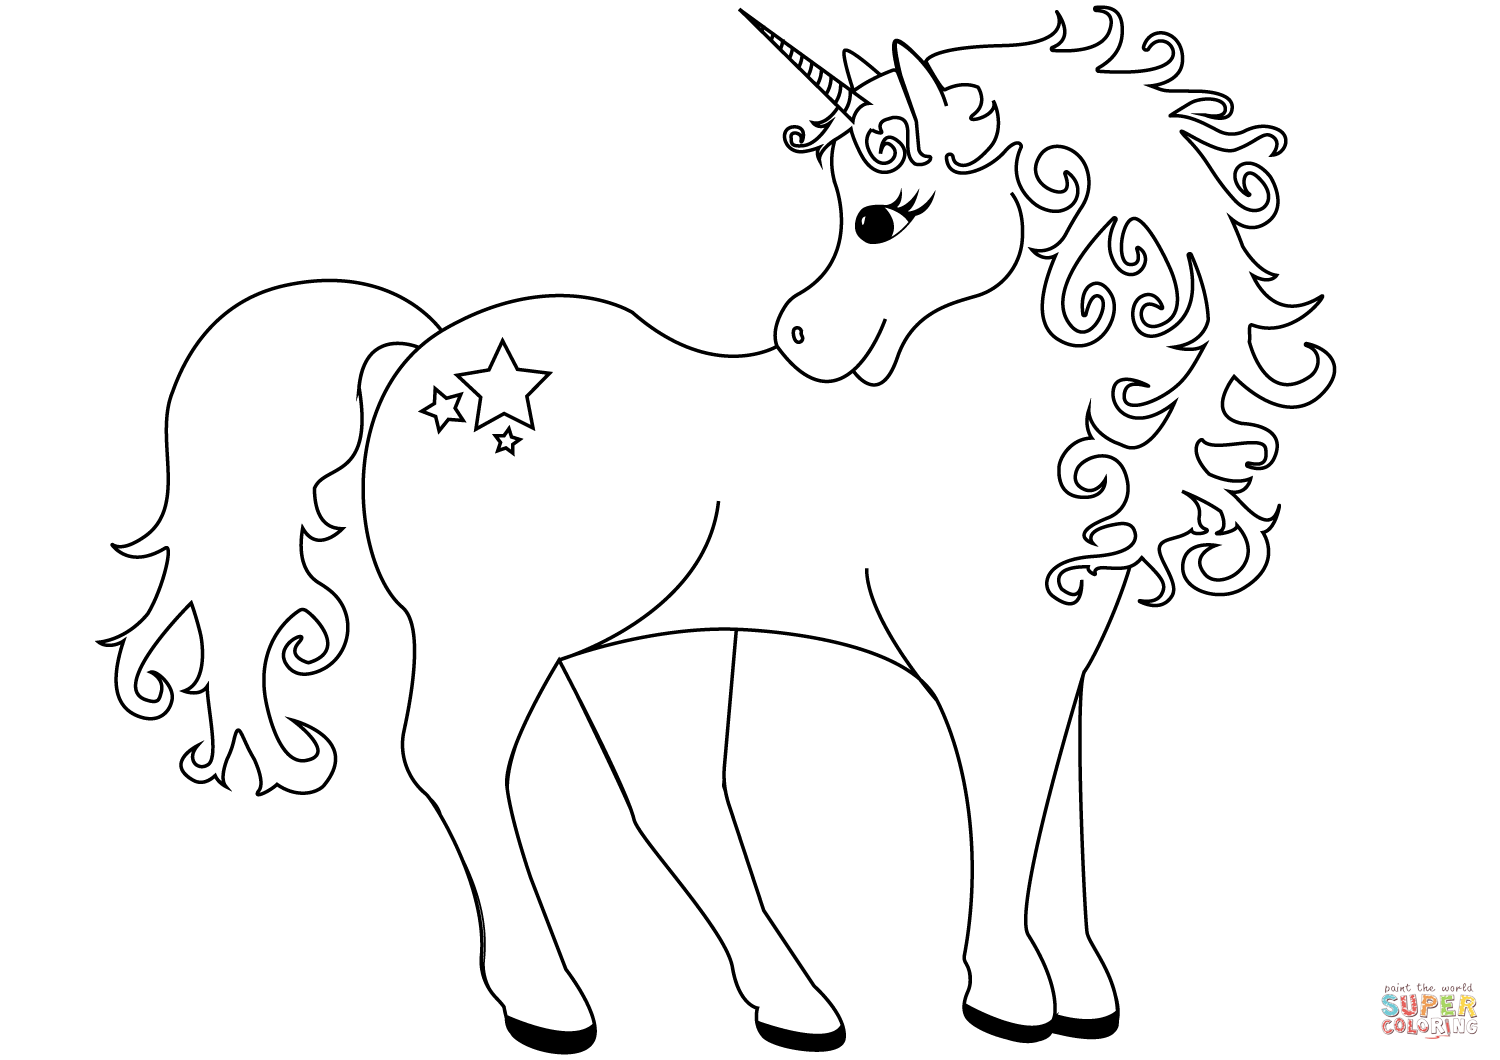 Cute Unicorn Coloring Pages at GetColorings.com | Free printable colorings pages to print and color